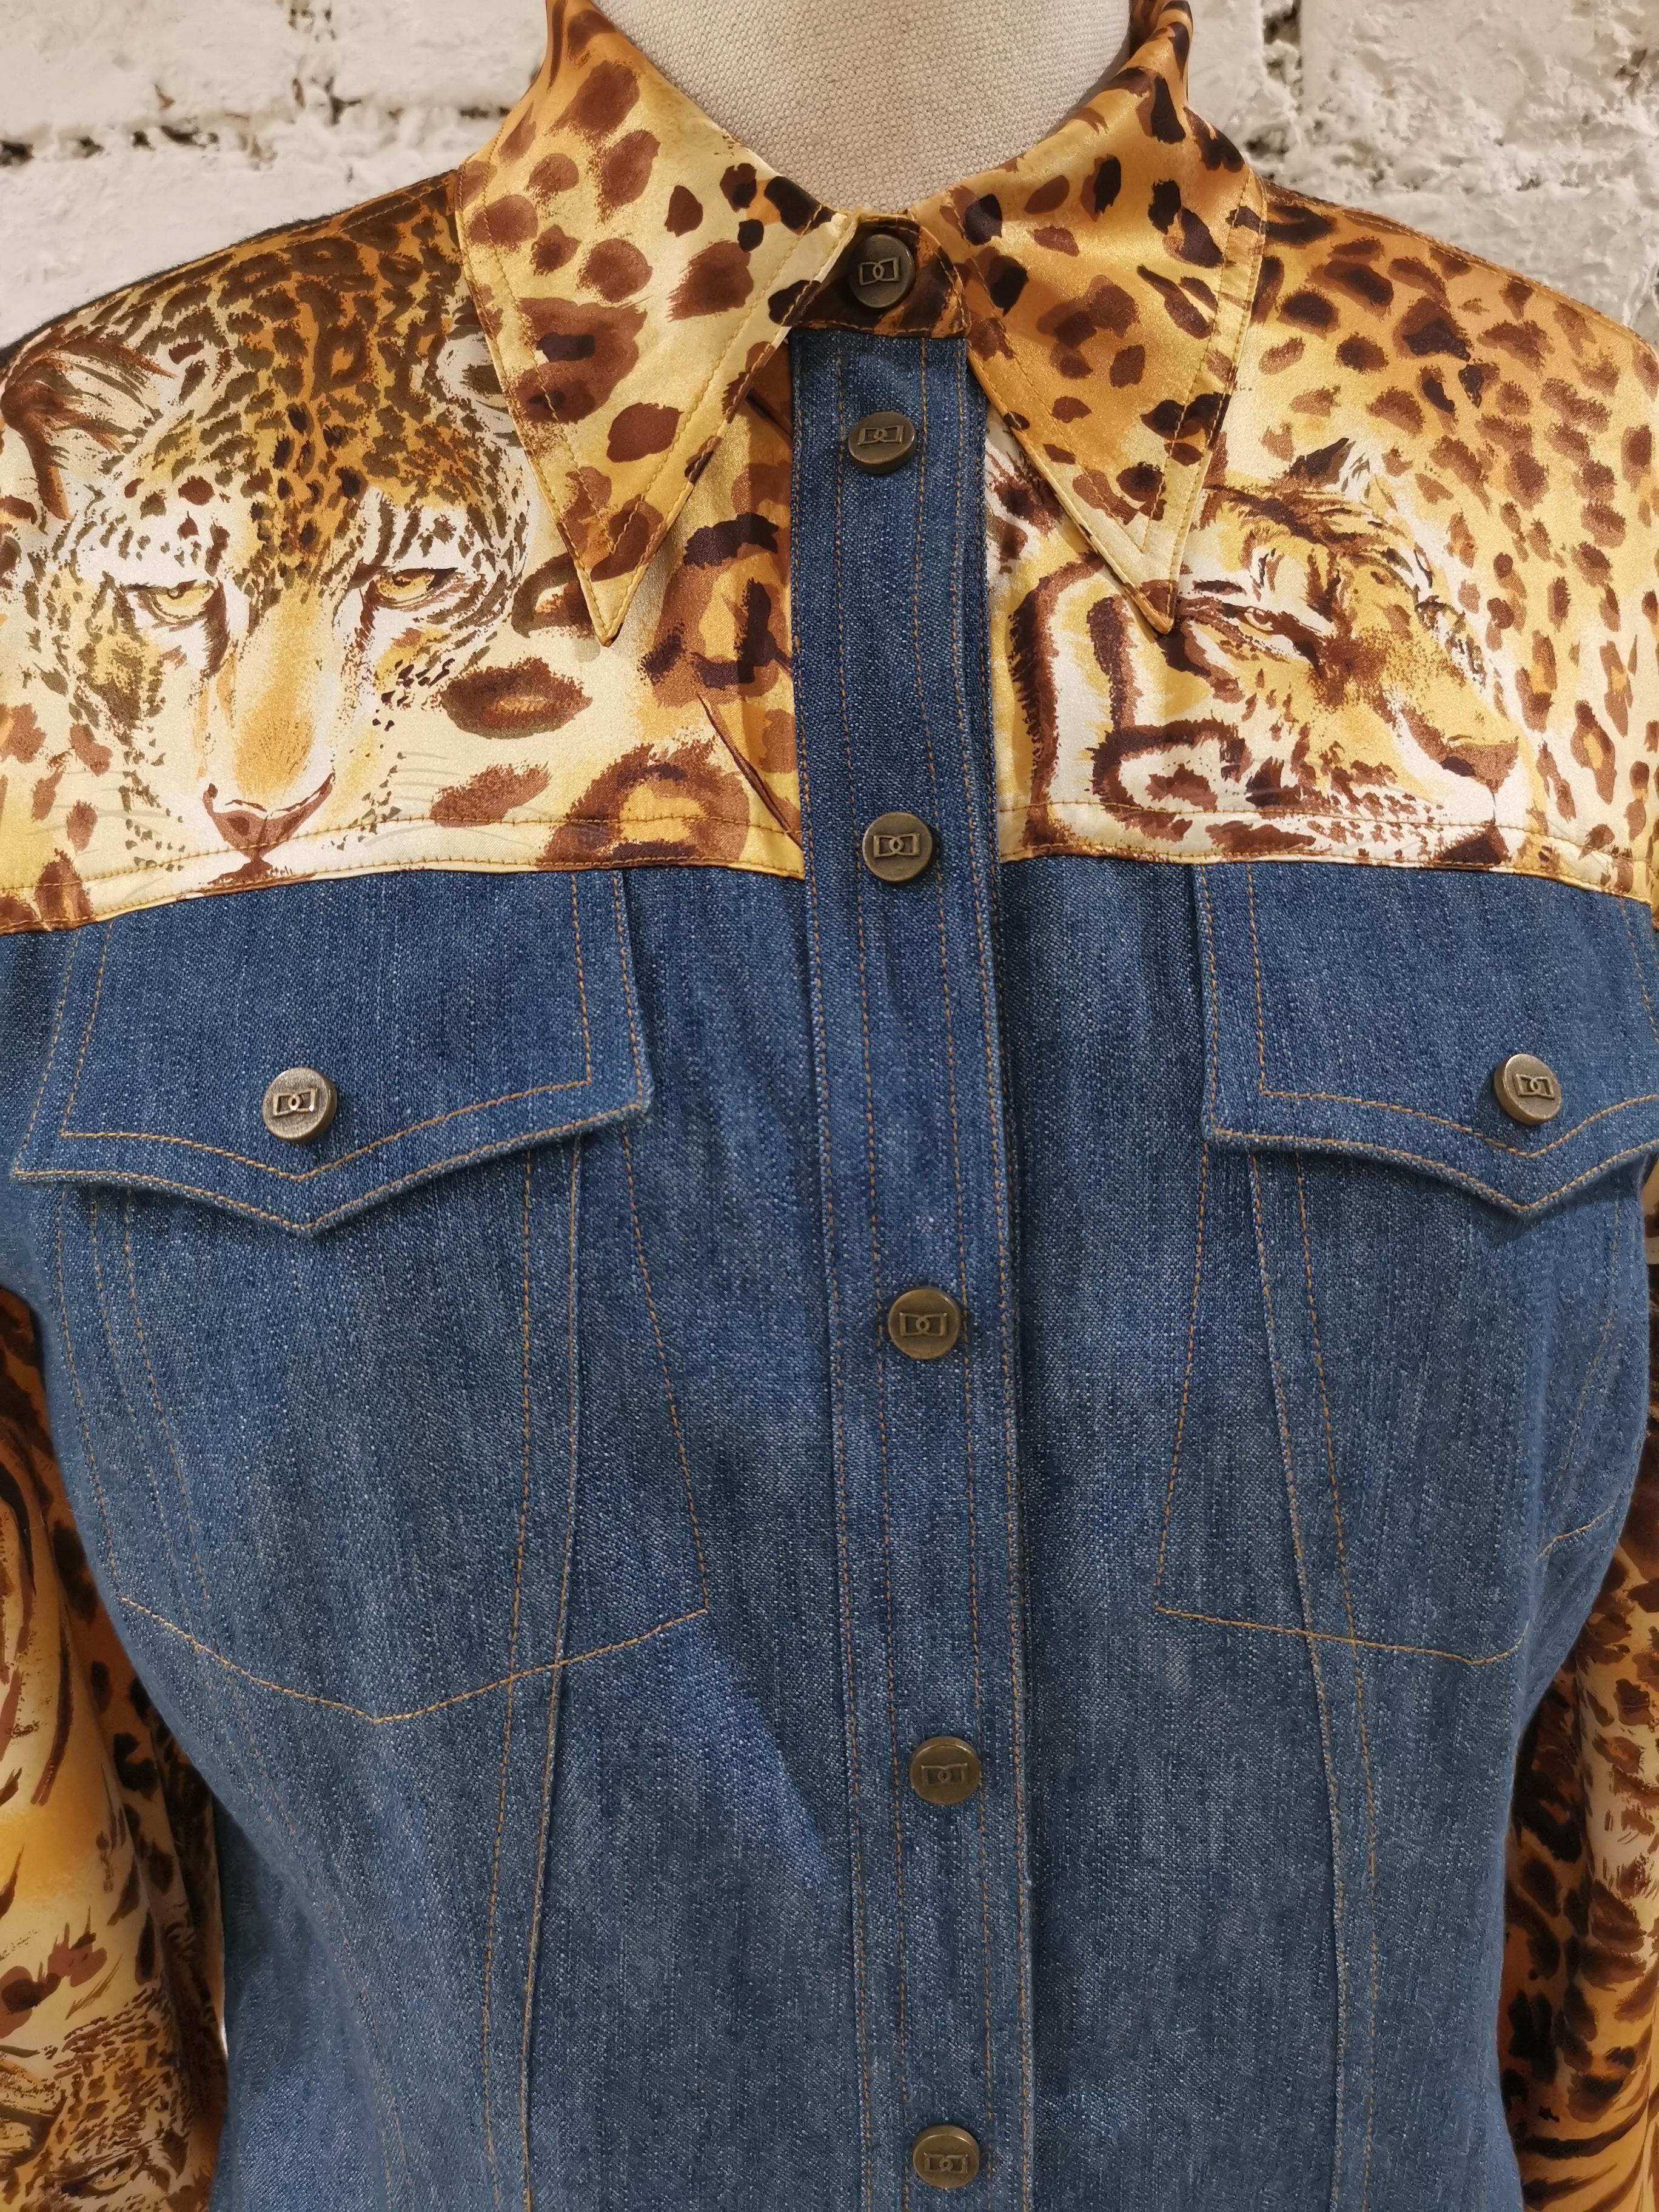 Di Bari denim leopard shirt
totally made in italy in size M
compsoition cotton and silk